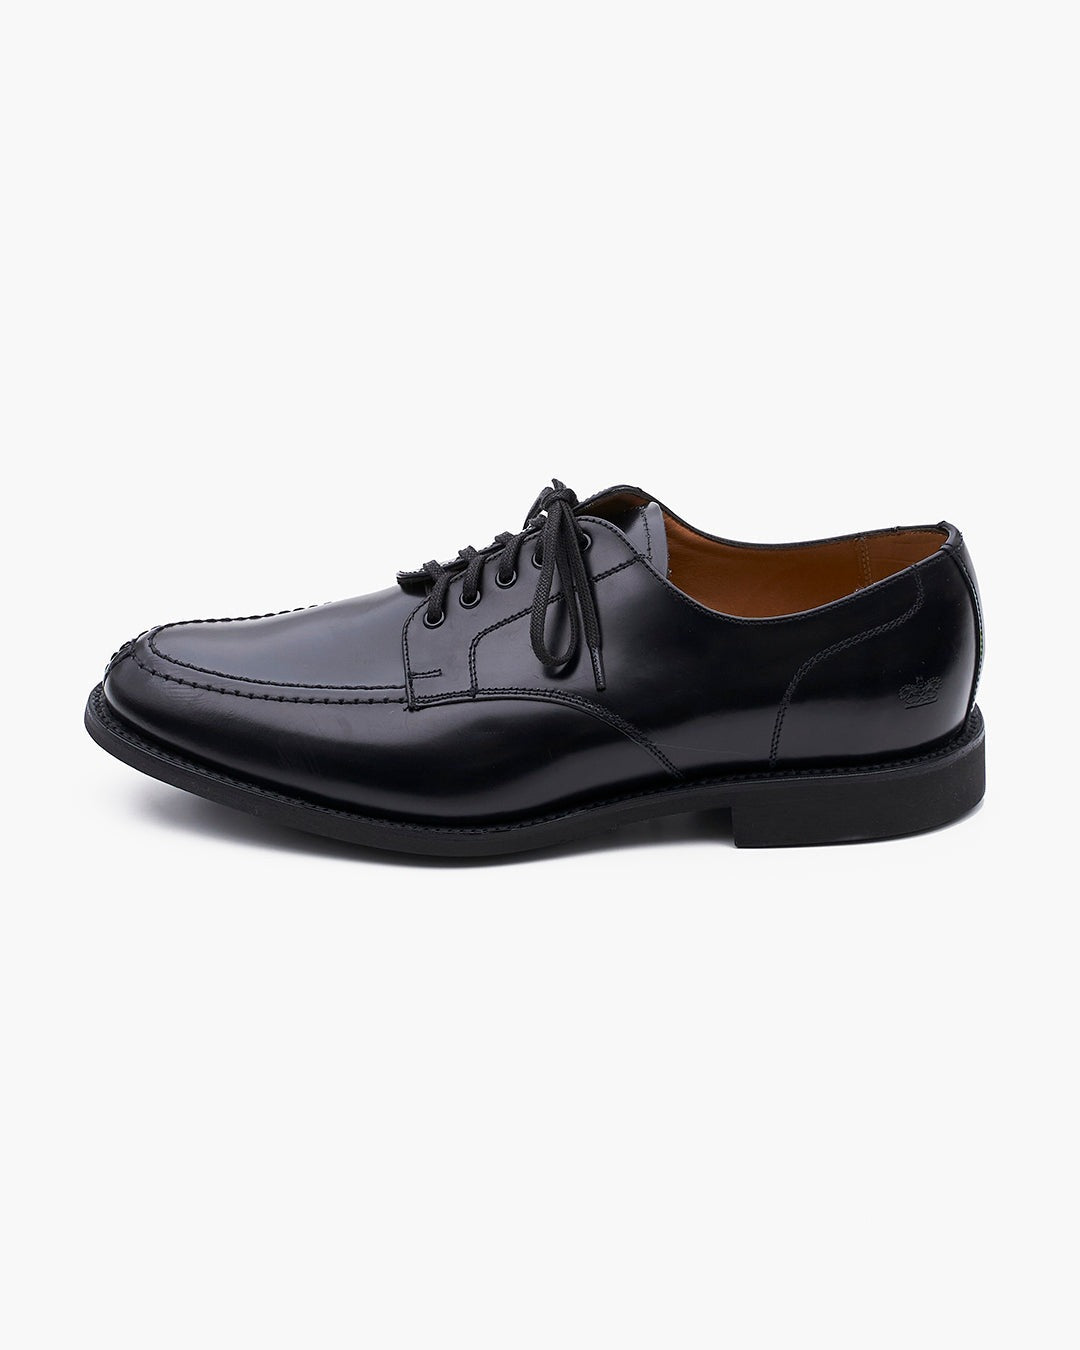 【Sanders】MILITARY APRON DERBY SHOES